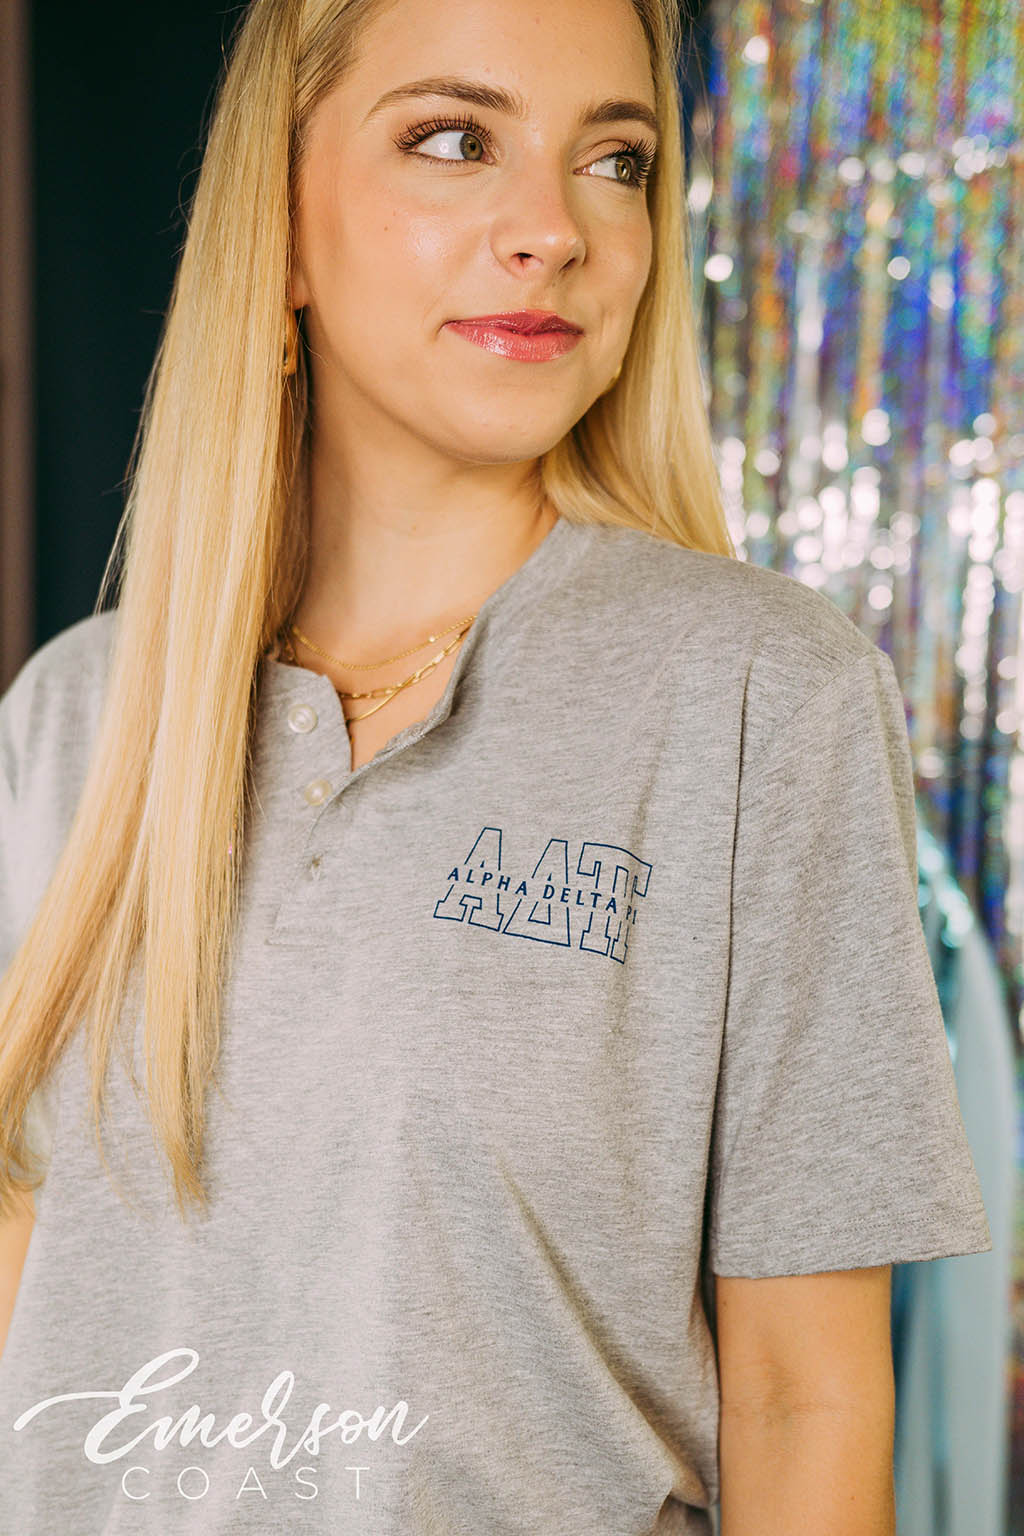 Girl wears light gray henley with ADPi letters on left chest.